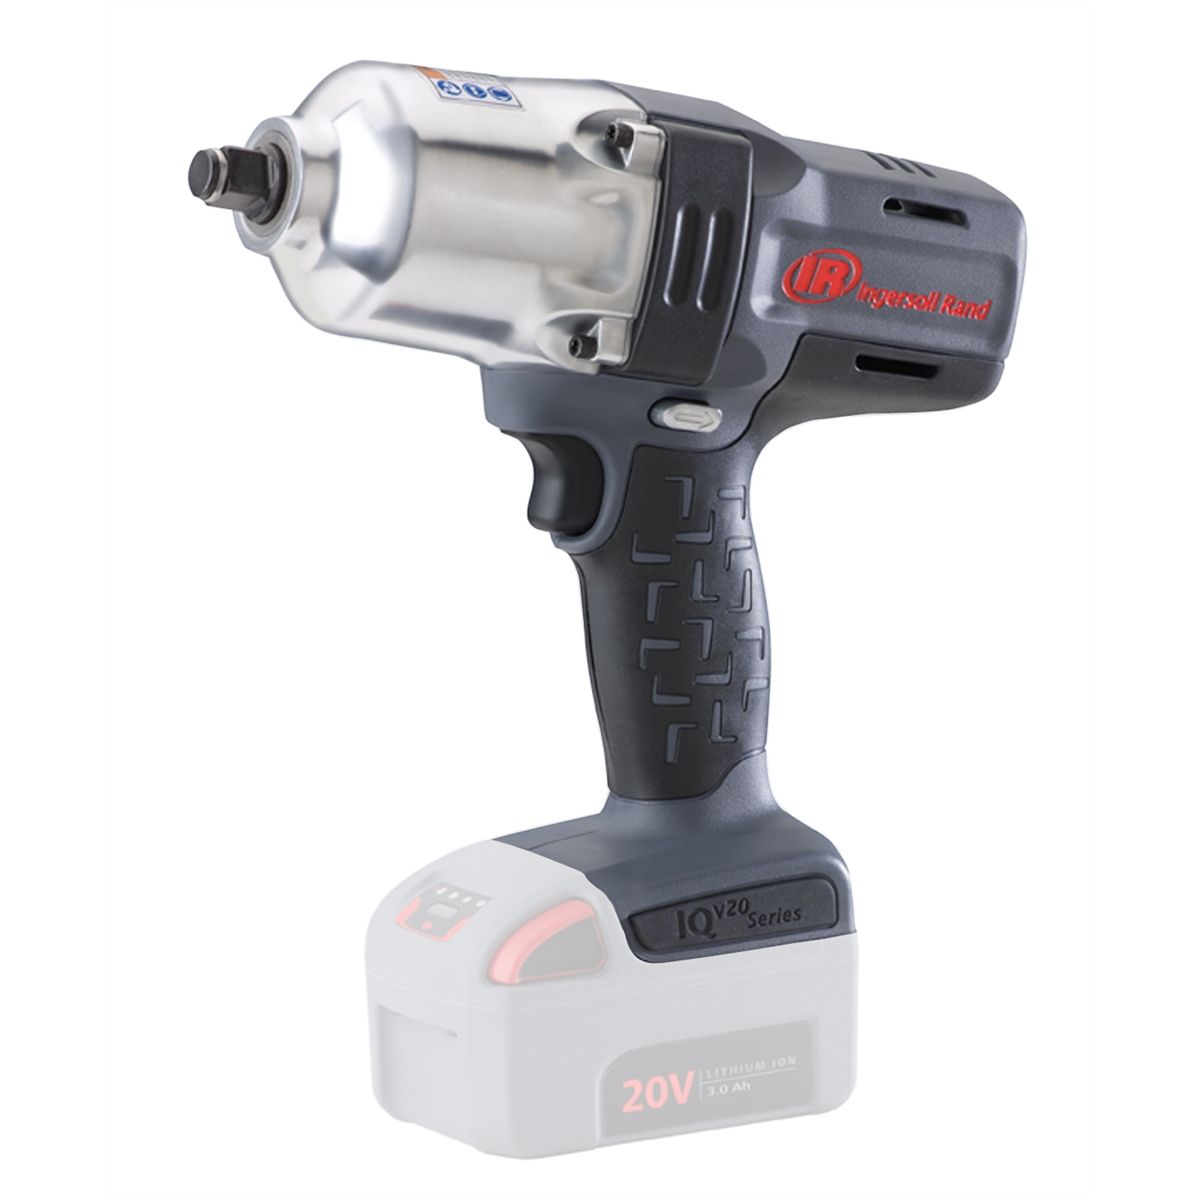 IQv20 Li-Ion 1/2 Inch Impact Wrench - Bare Tool Only